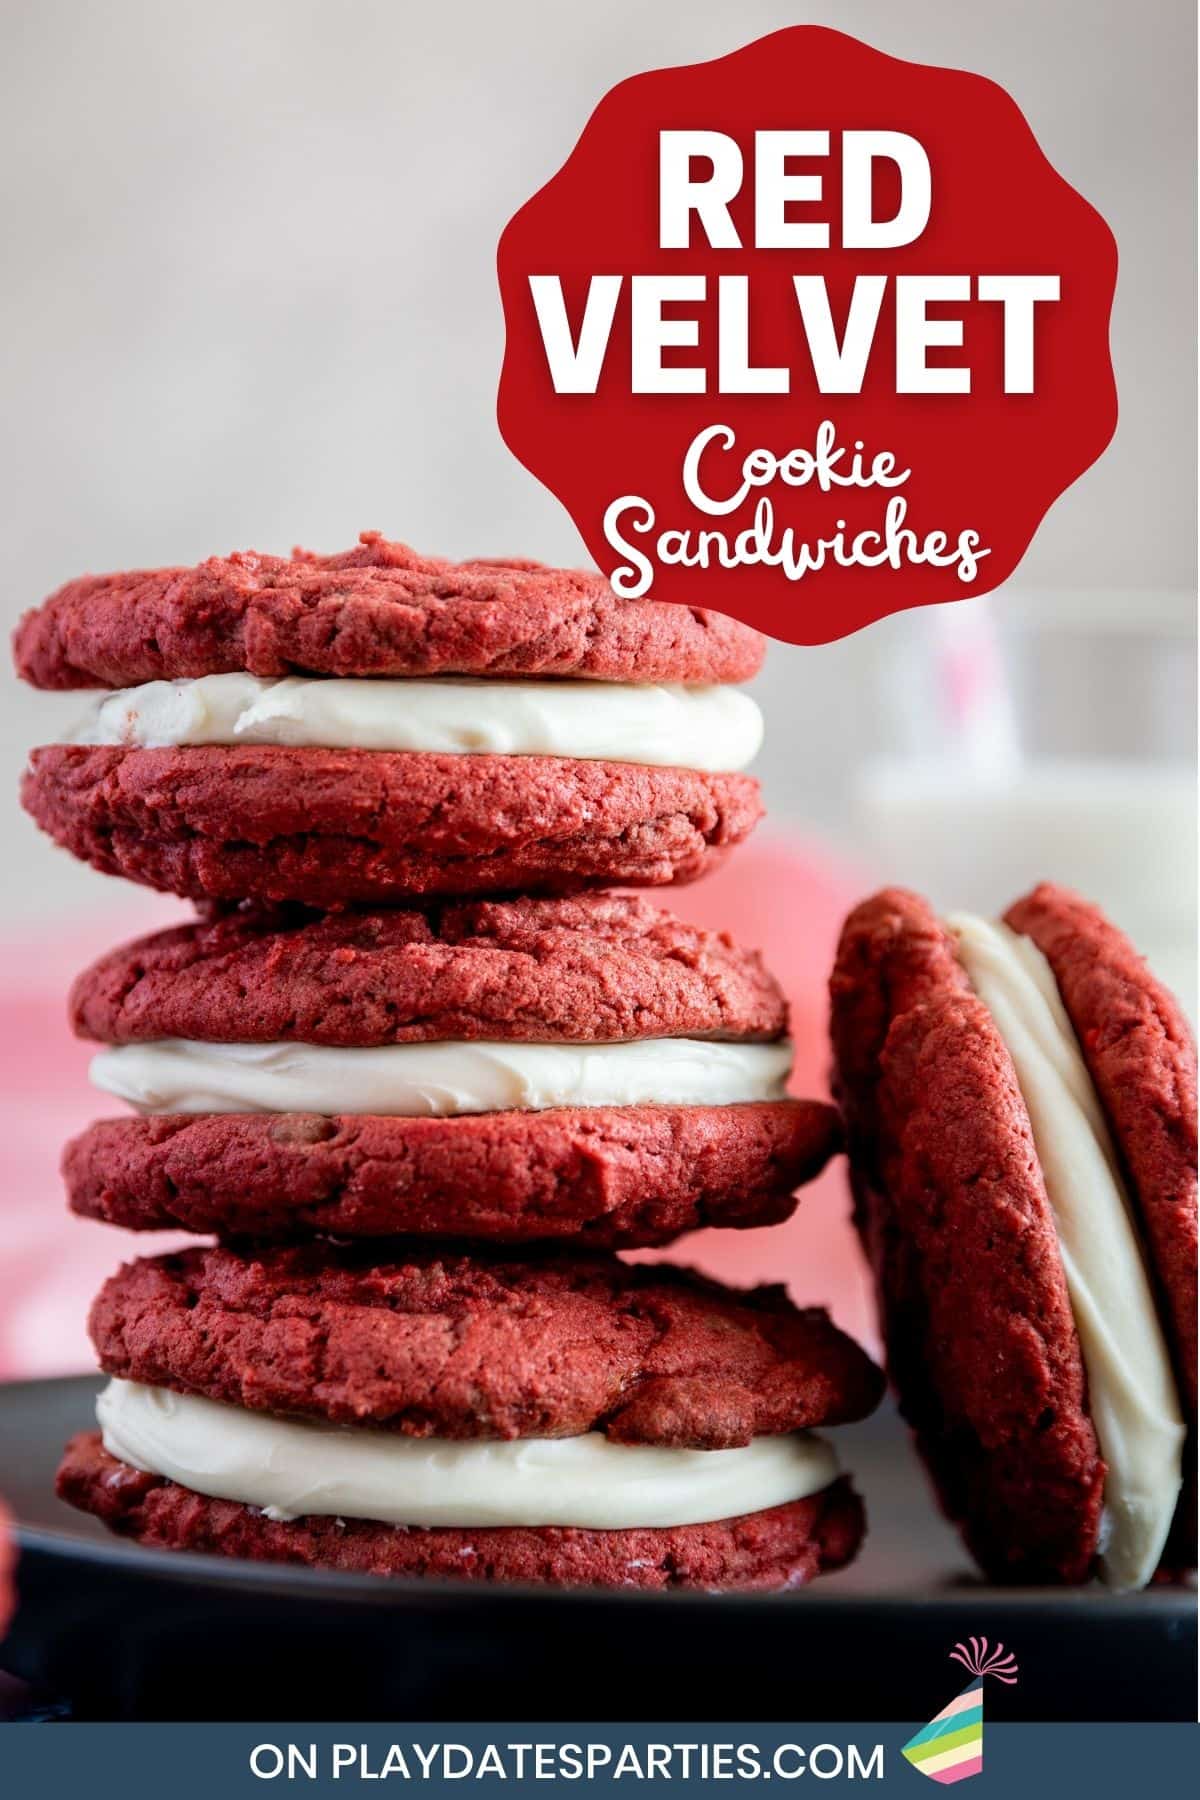 Cookies stacked on a plate in front of a glass of milk with text overlay red velvet cookie sandwiches.